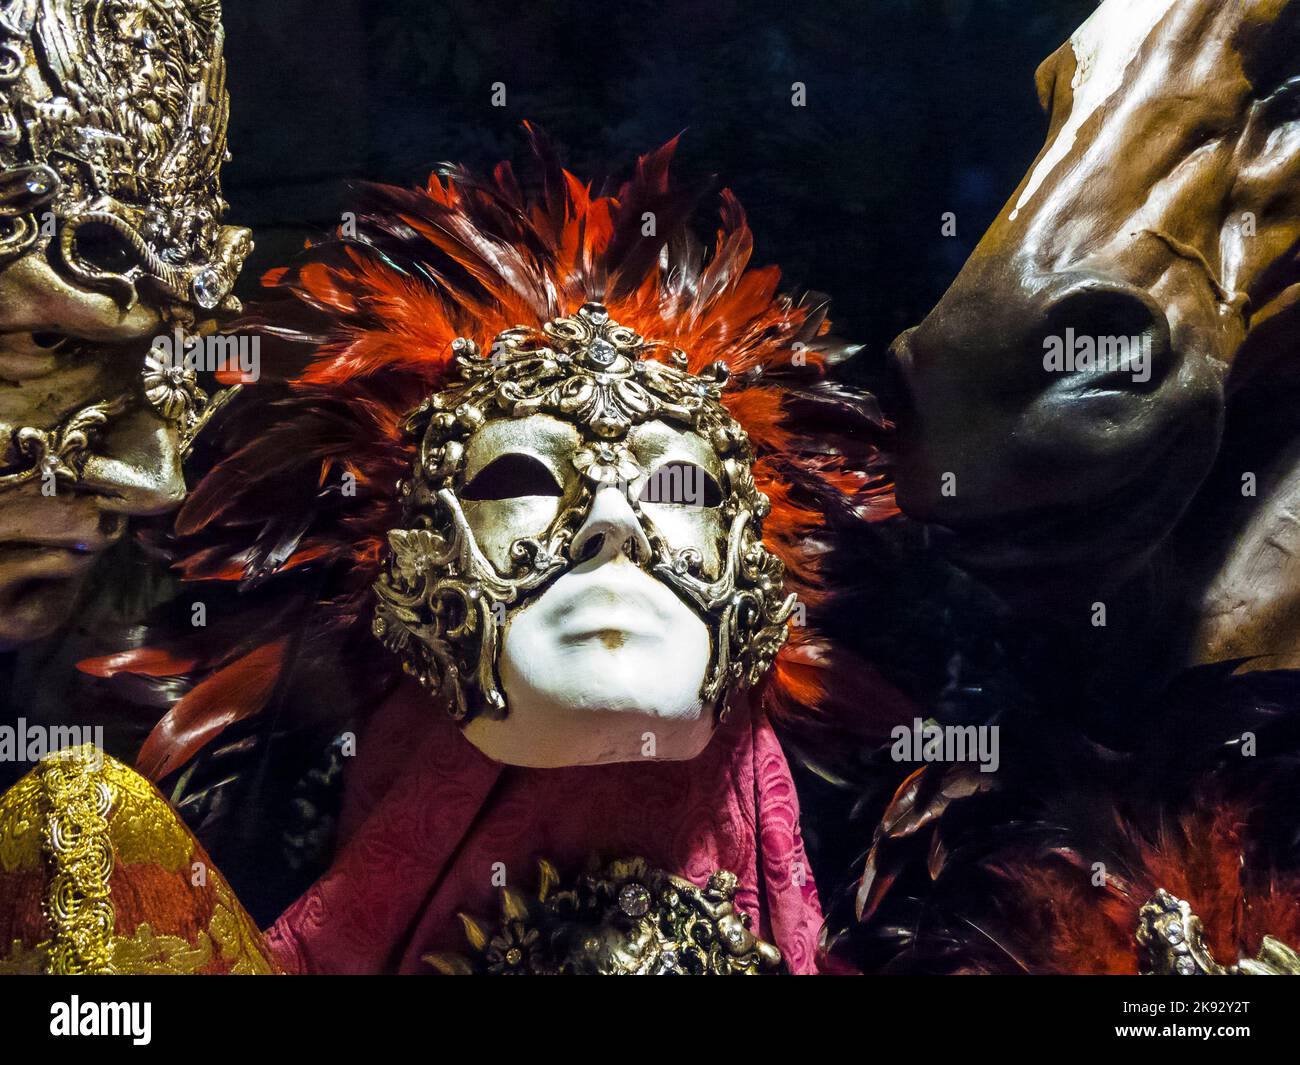 VENICE, ITALY - SEP 12, 2014: Venetian masks as symbol for the venetian carnival lying in the shop in Venice, Italy. Wearing a mask is an old traditio Stock Photo